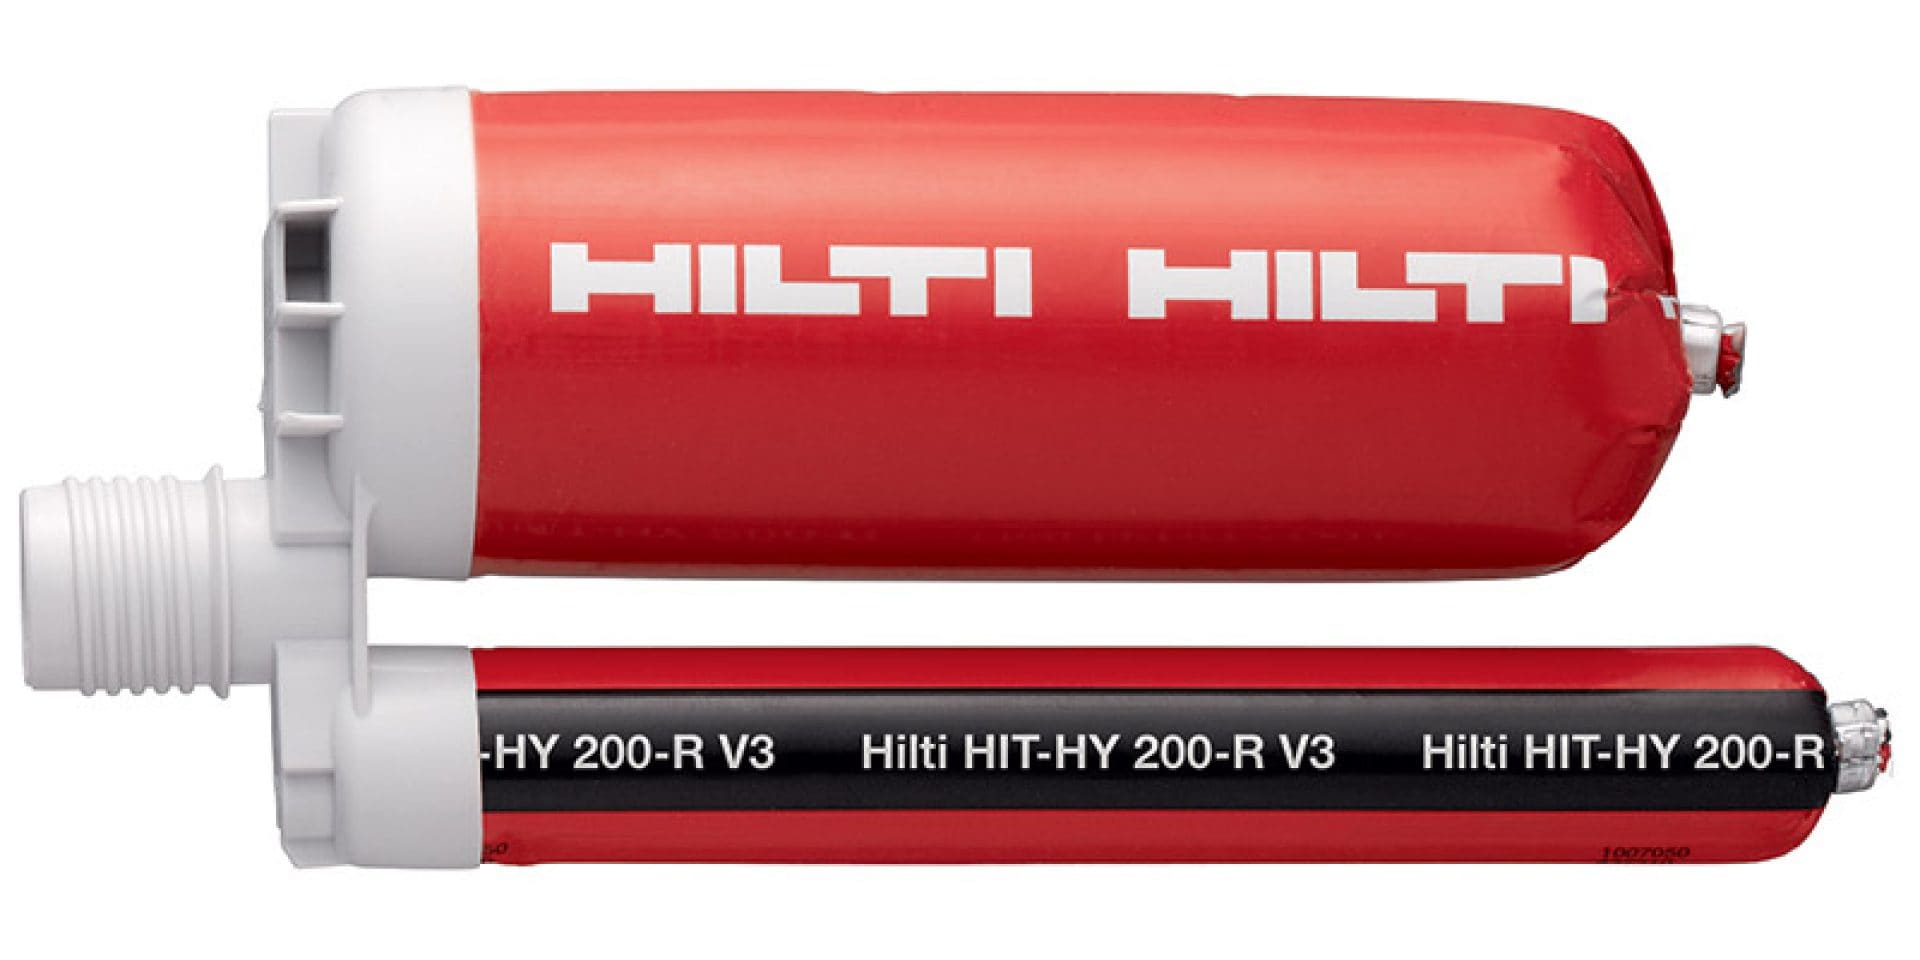 Hilti injectable mortar HIT-HY 200 R-V3